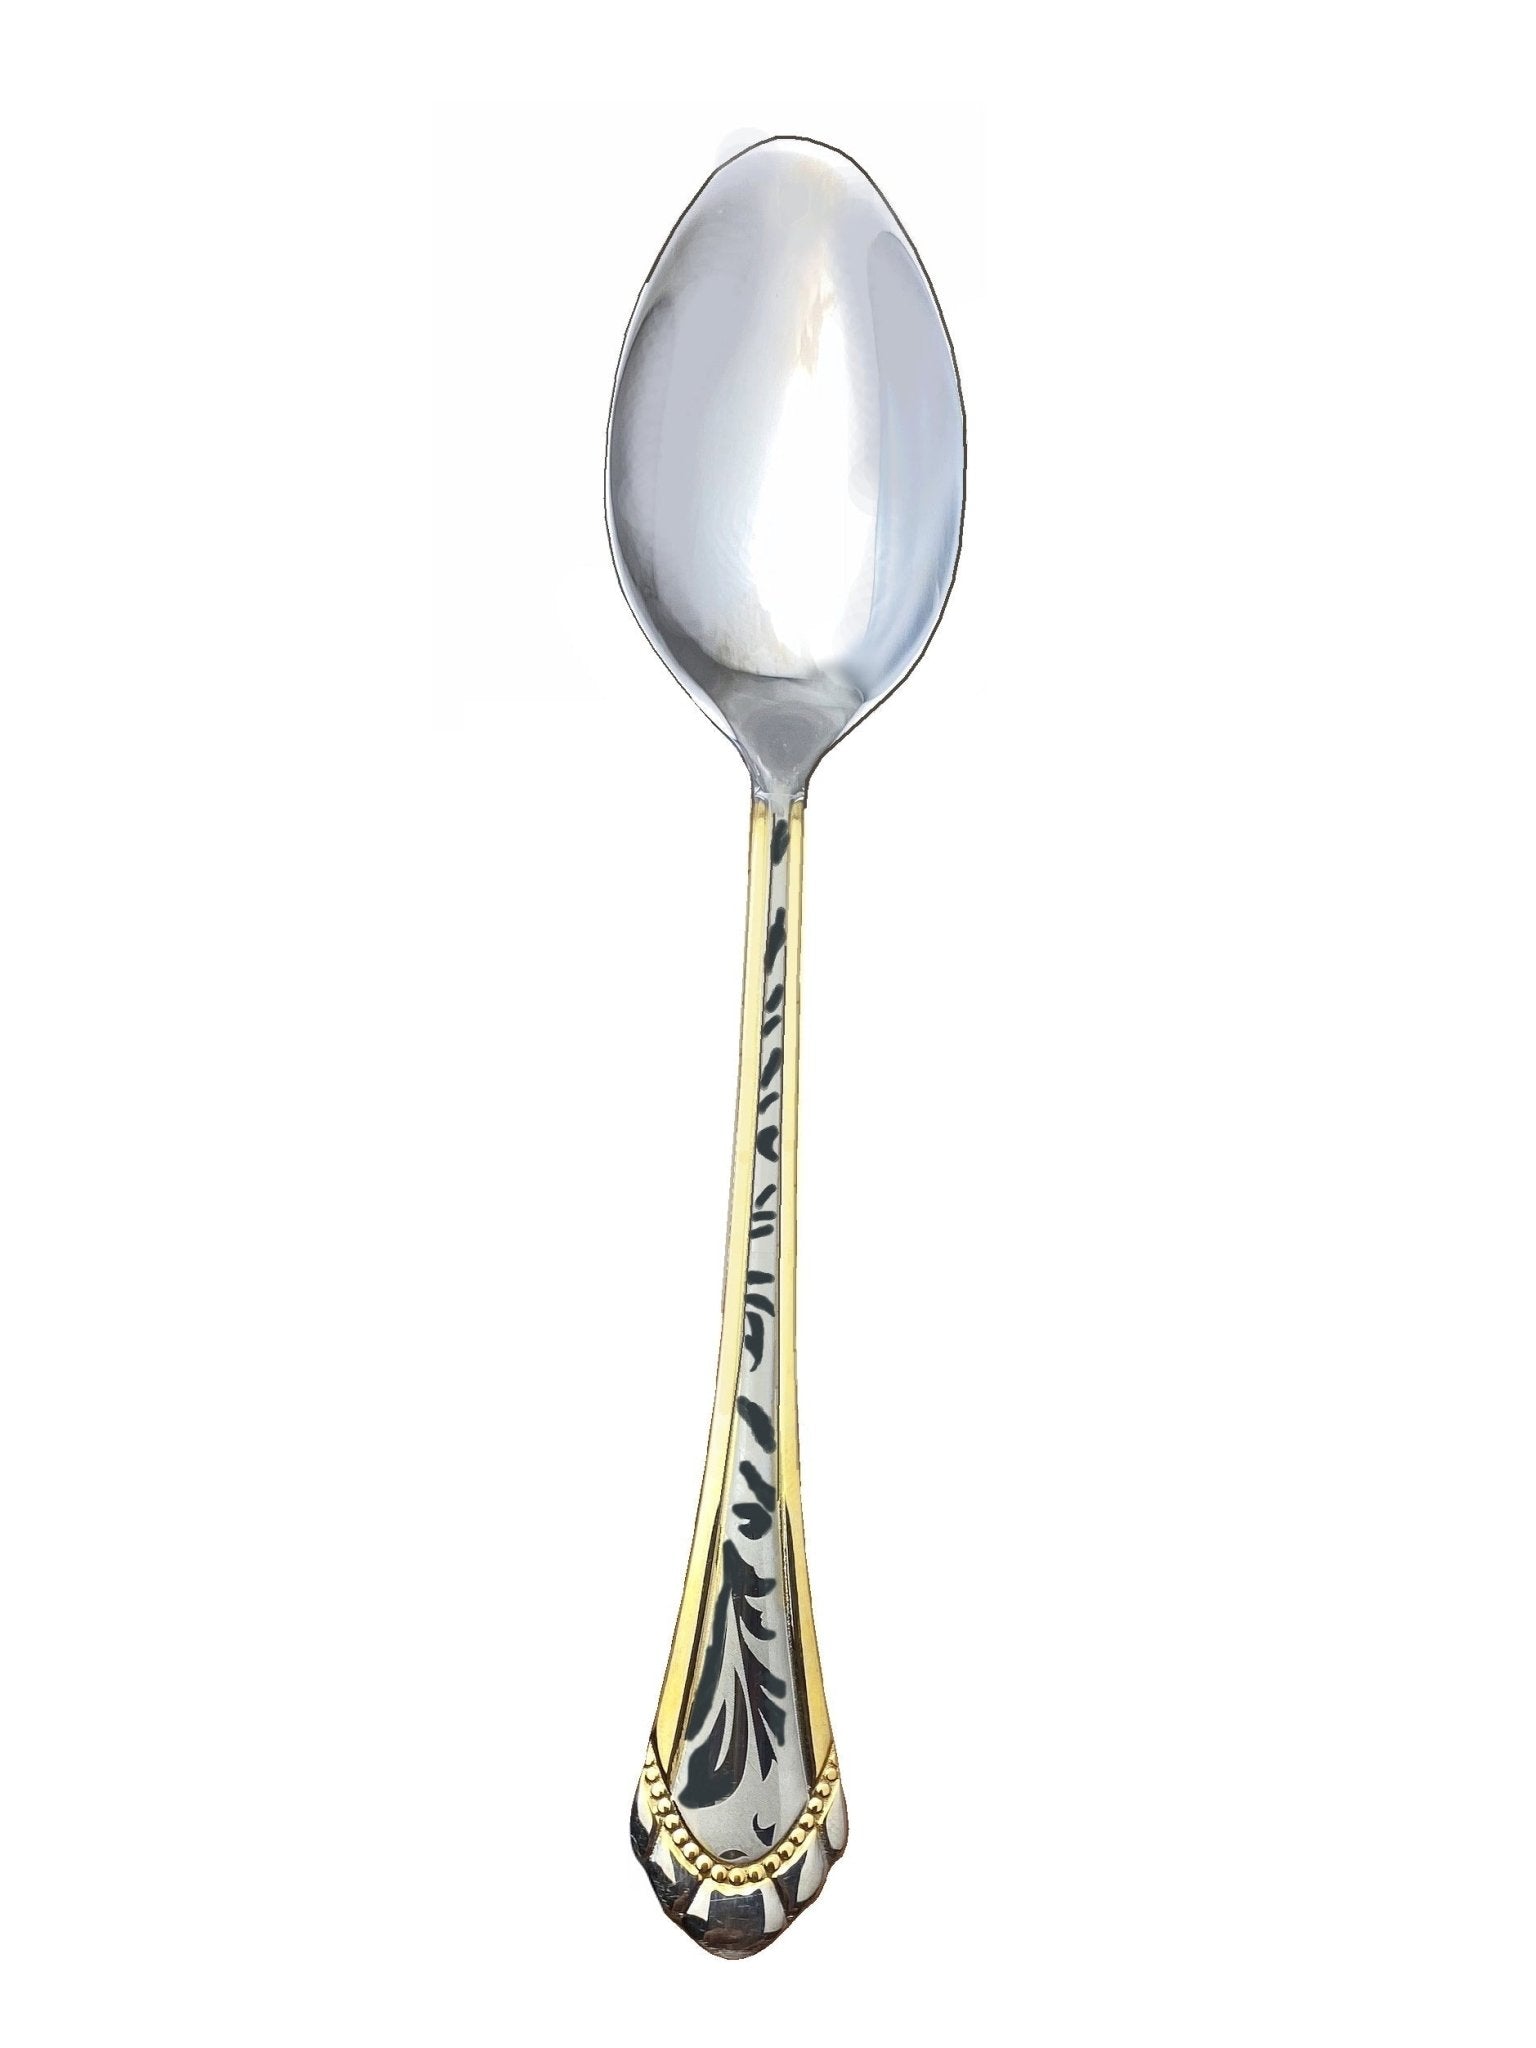 Classy Stainless Steel Dinner Spoons - 6 Pcs - Silver/Gold Colored (Ghashogh Ghaza Khori)